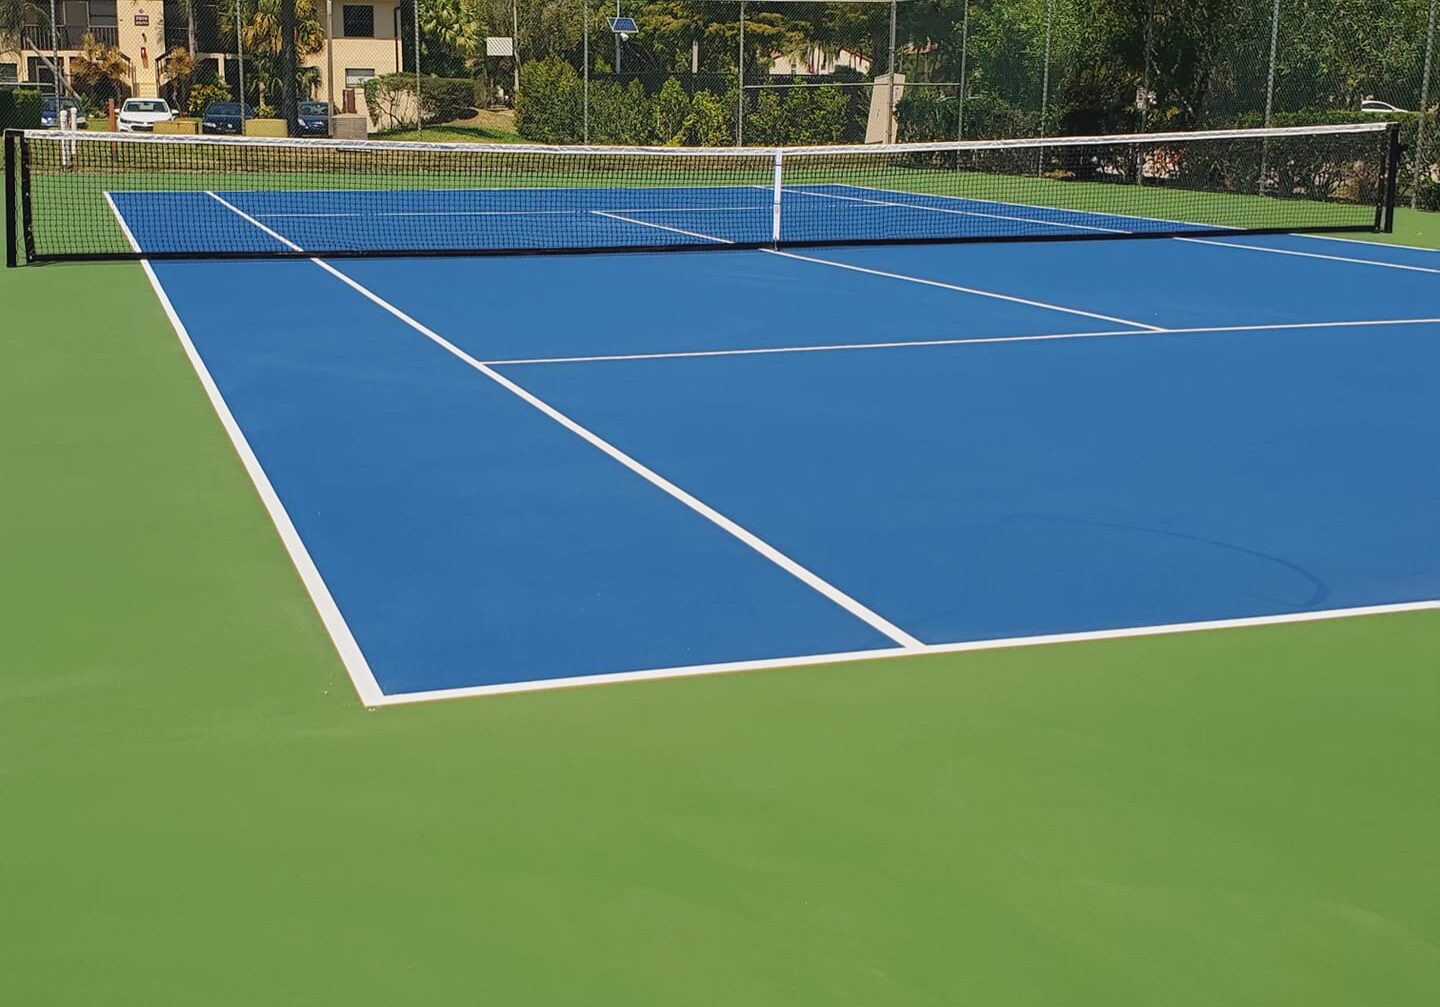 Professional Tennis Court Services - Tennis Court Construction and Resurfacing - Royal Palm Beach, Wellington, Delray Beach, West Palm Beach, Palm Beach County